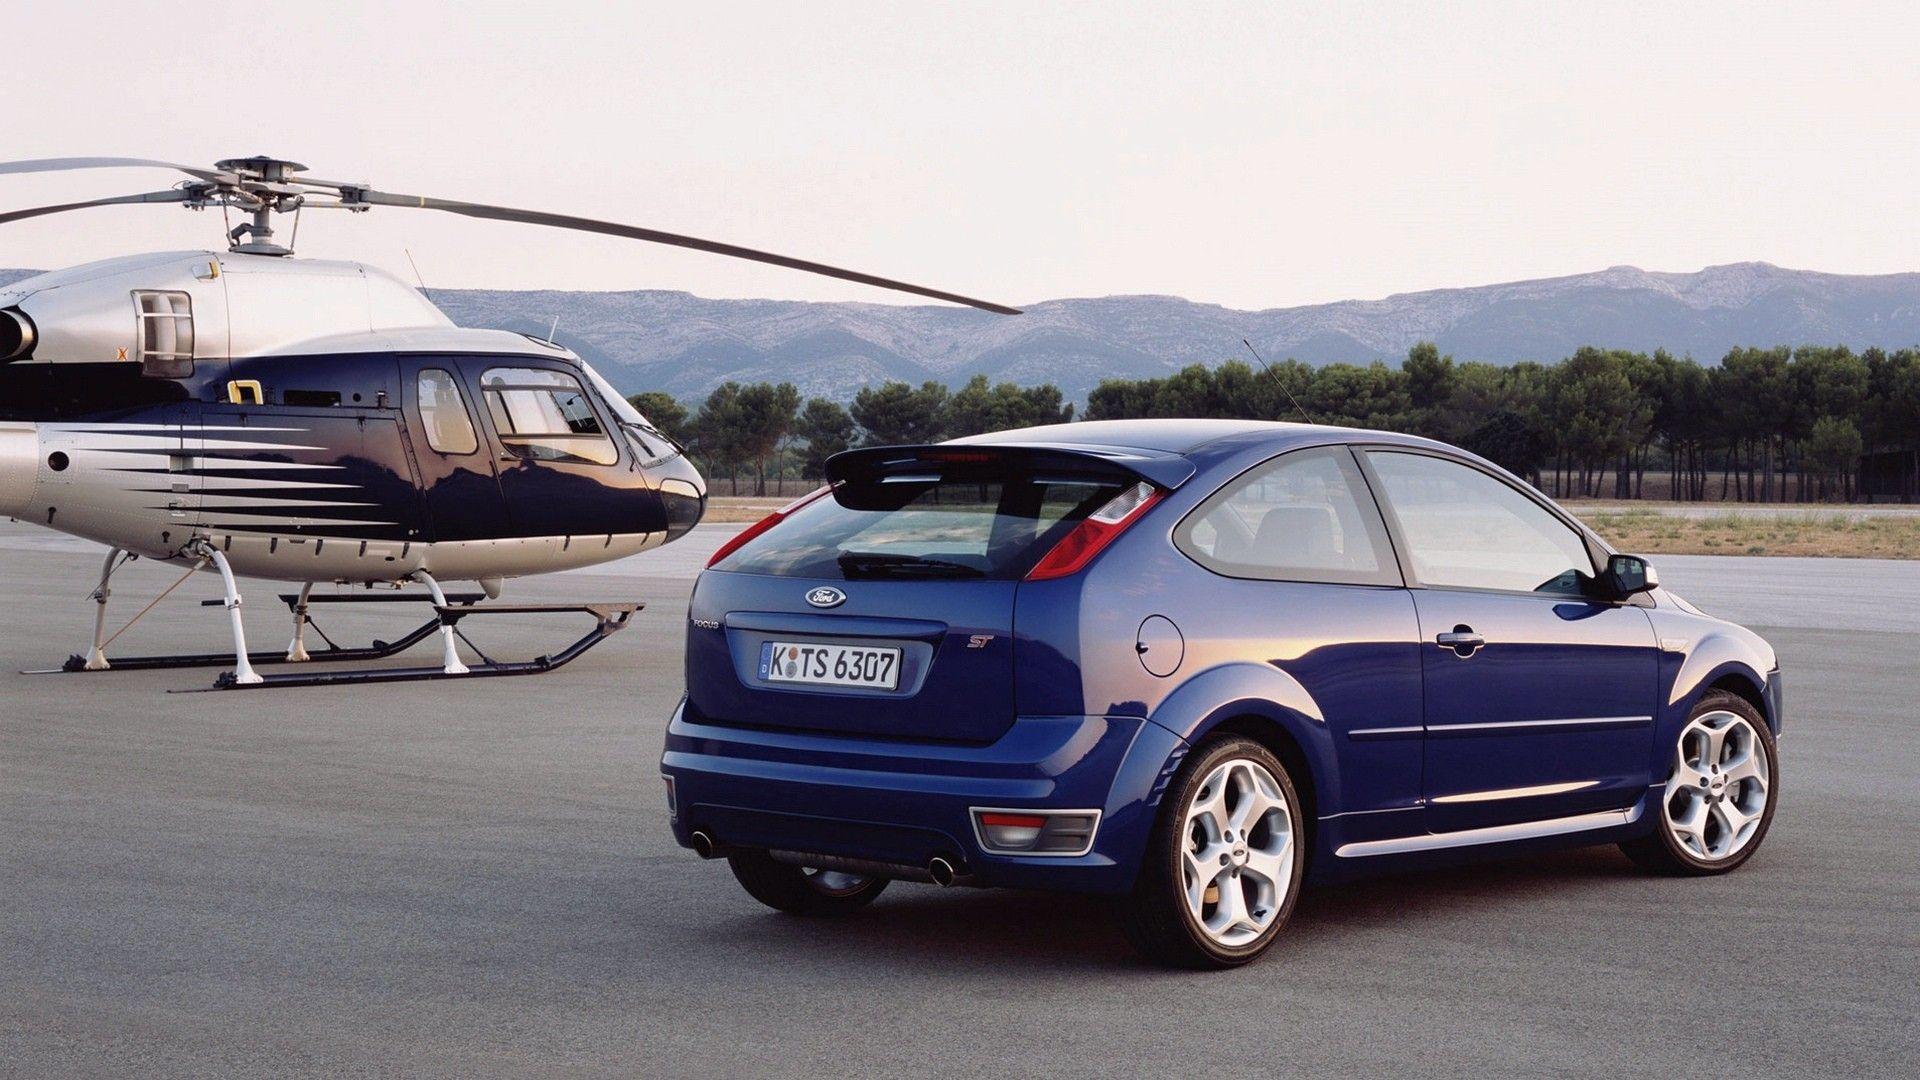 Ford Focus wallpaper HD and videos